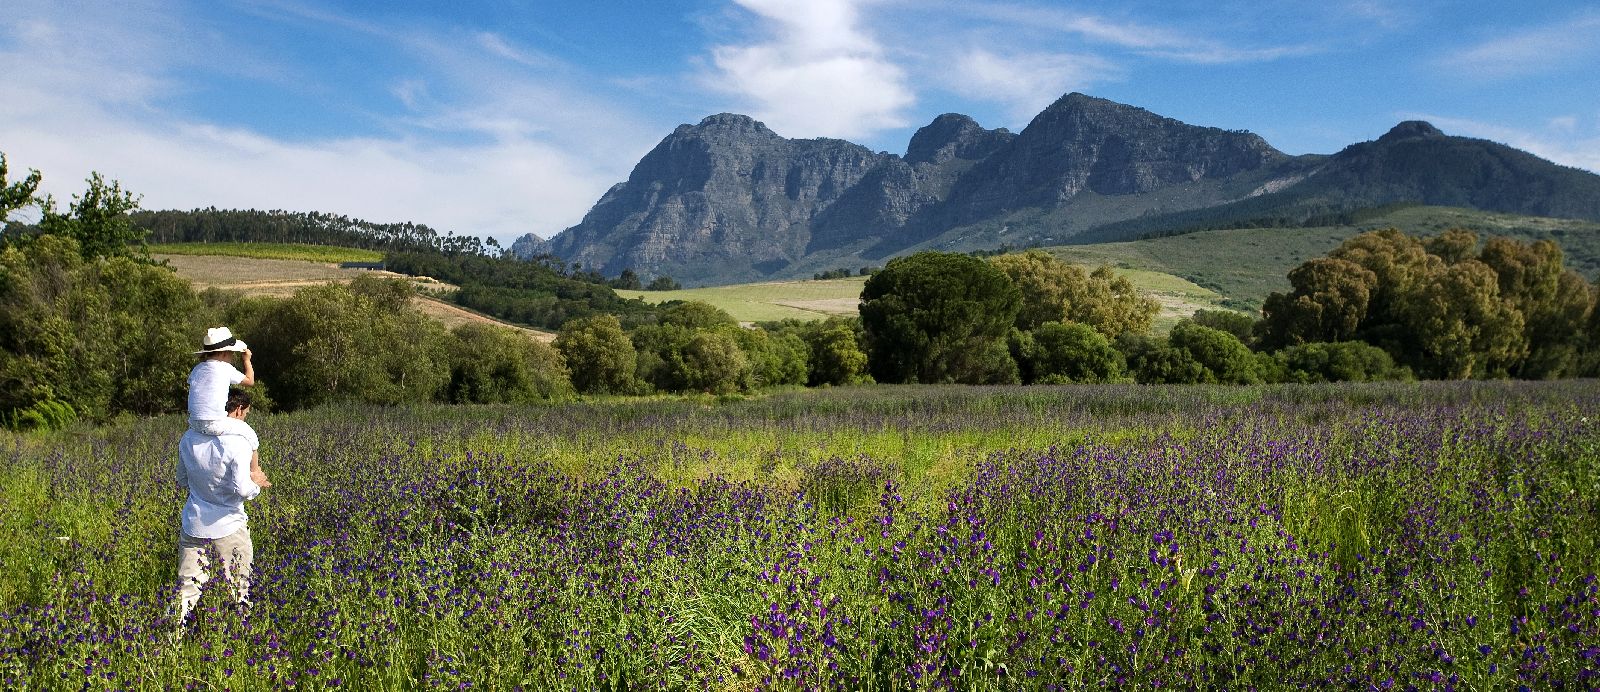 Parent and child walking through wildflower meadows at Babylonstoren in South Africa